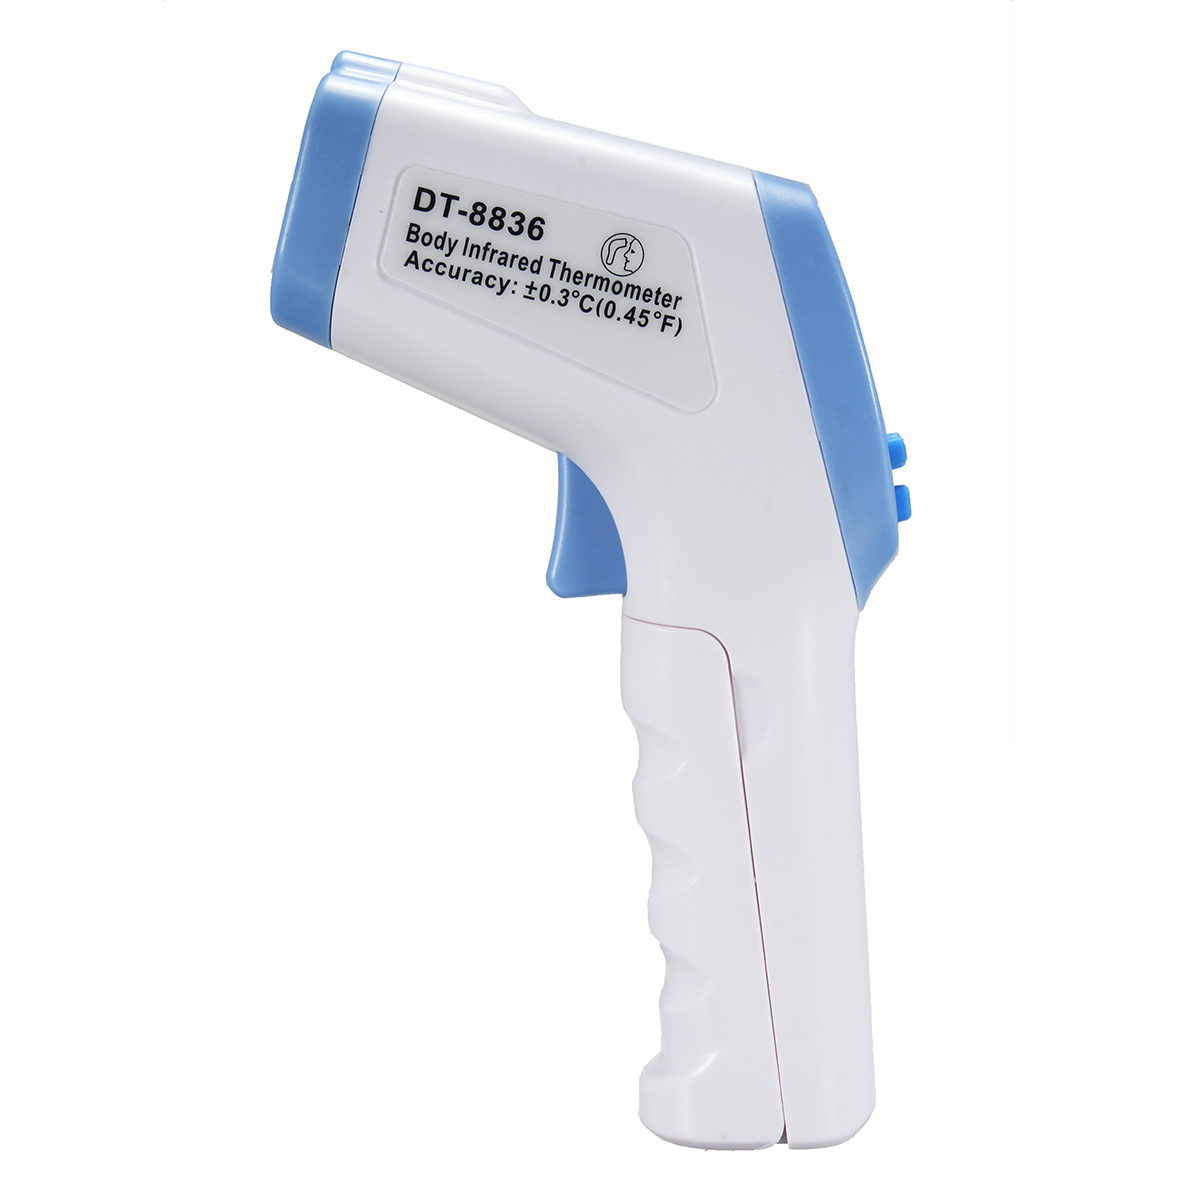 Digital-Non-Contact-No-Touch-Infrared-Forehead-Thermometer-DigitalThermometer-Measuring-Range-32-425-1132170-5